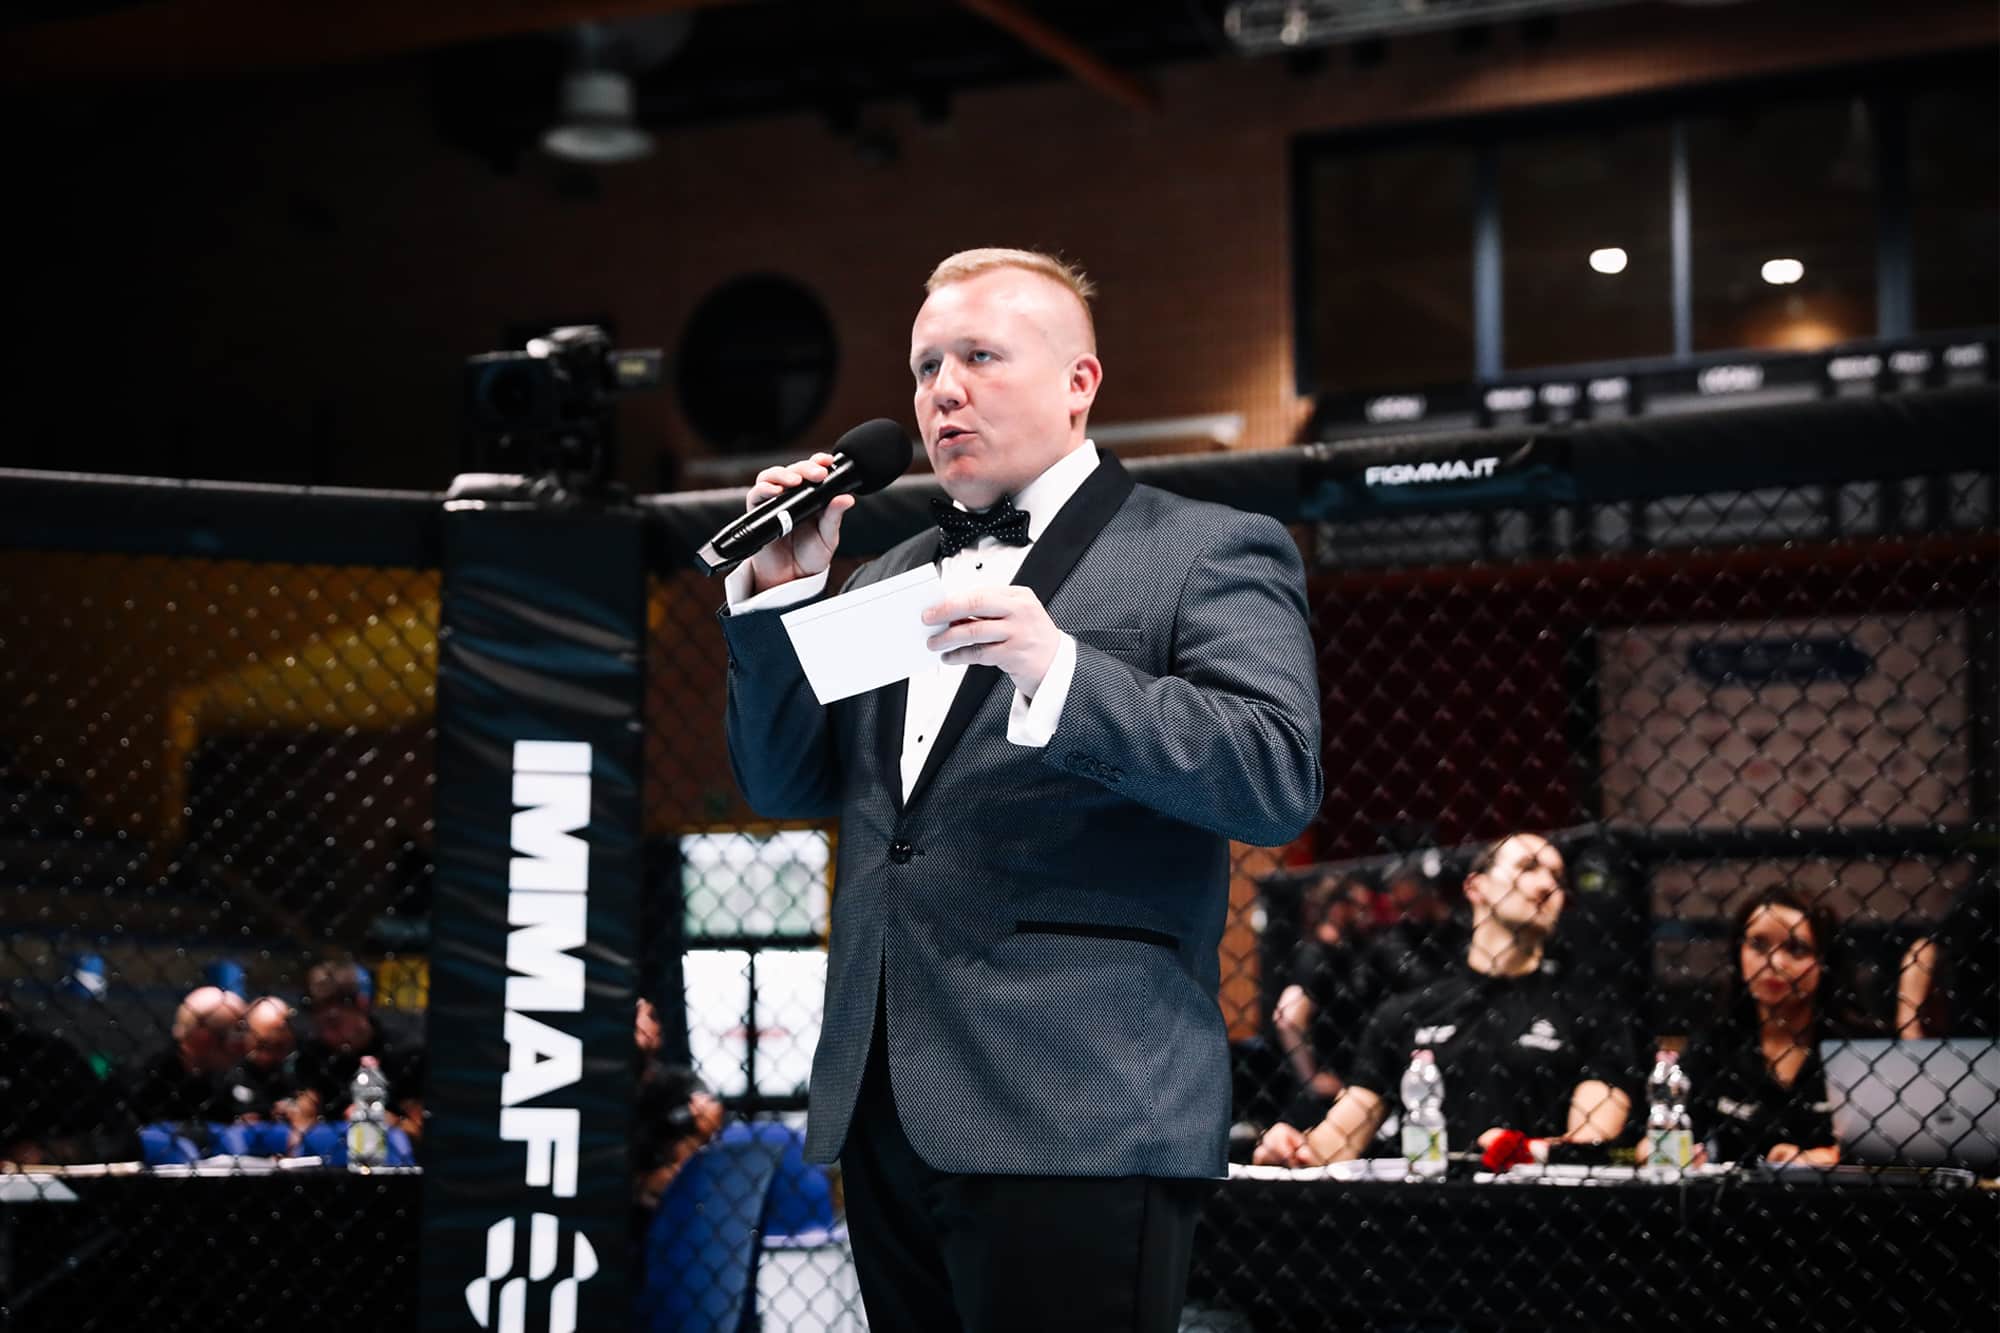 Ricky Wright Appointed New President of MMA Cymru Following Chris Rees’s Departure